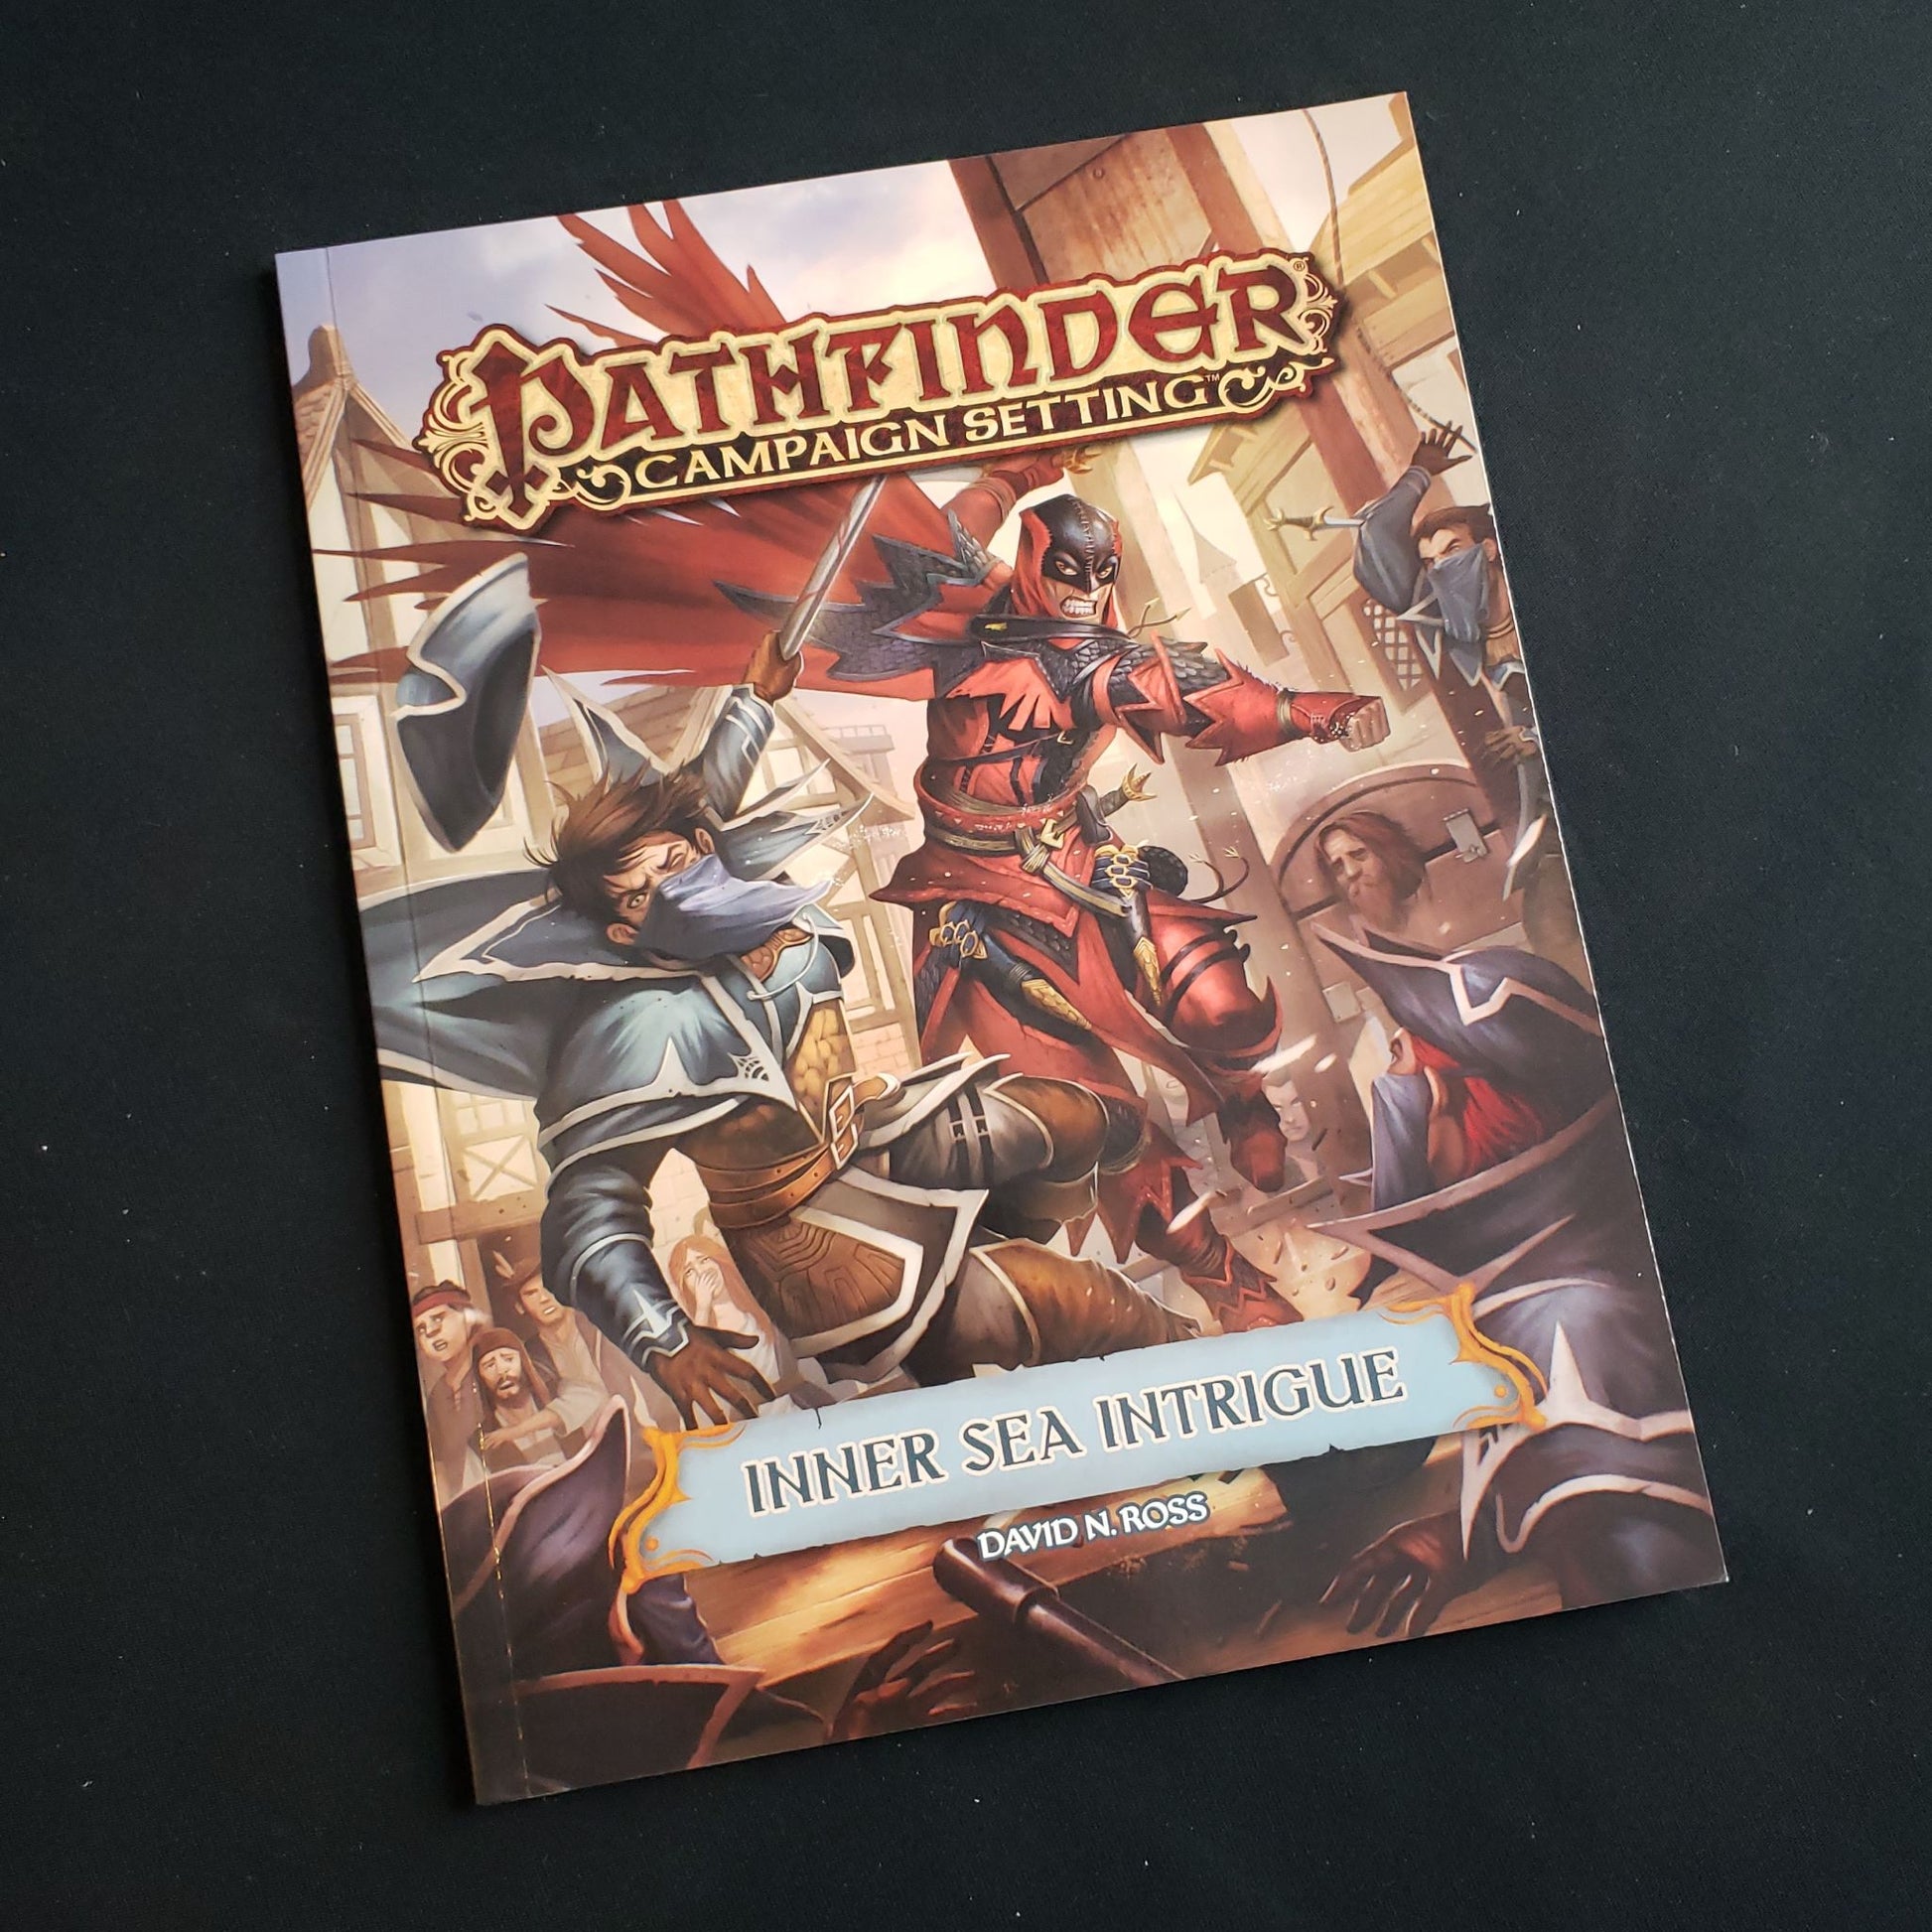 Image shows the front cover of the Inner Sea Intrigue book for the Pathfinder First Edition roleplaying game